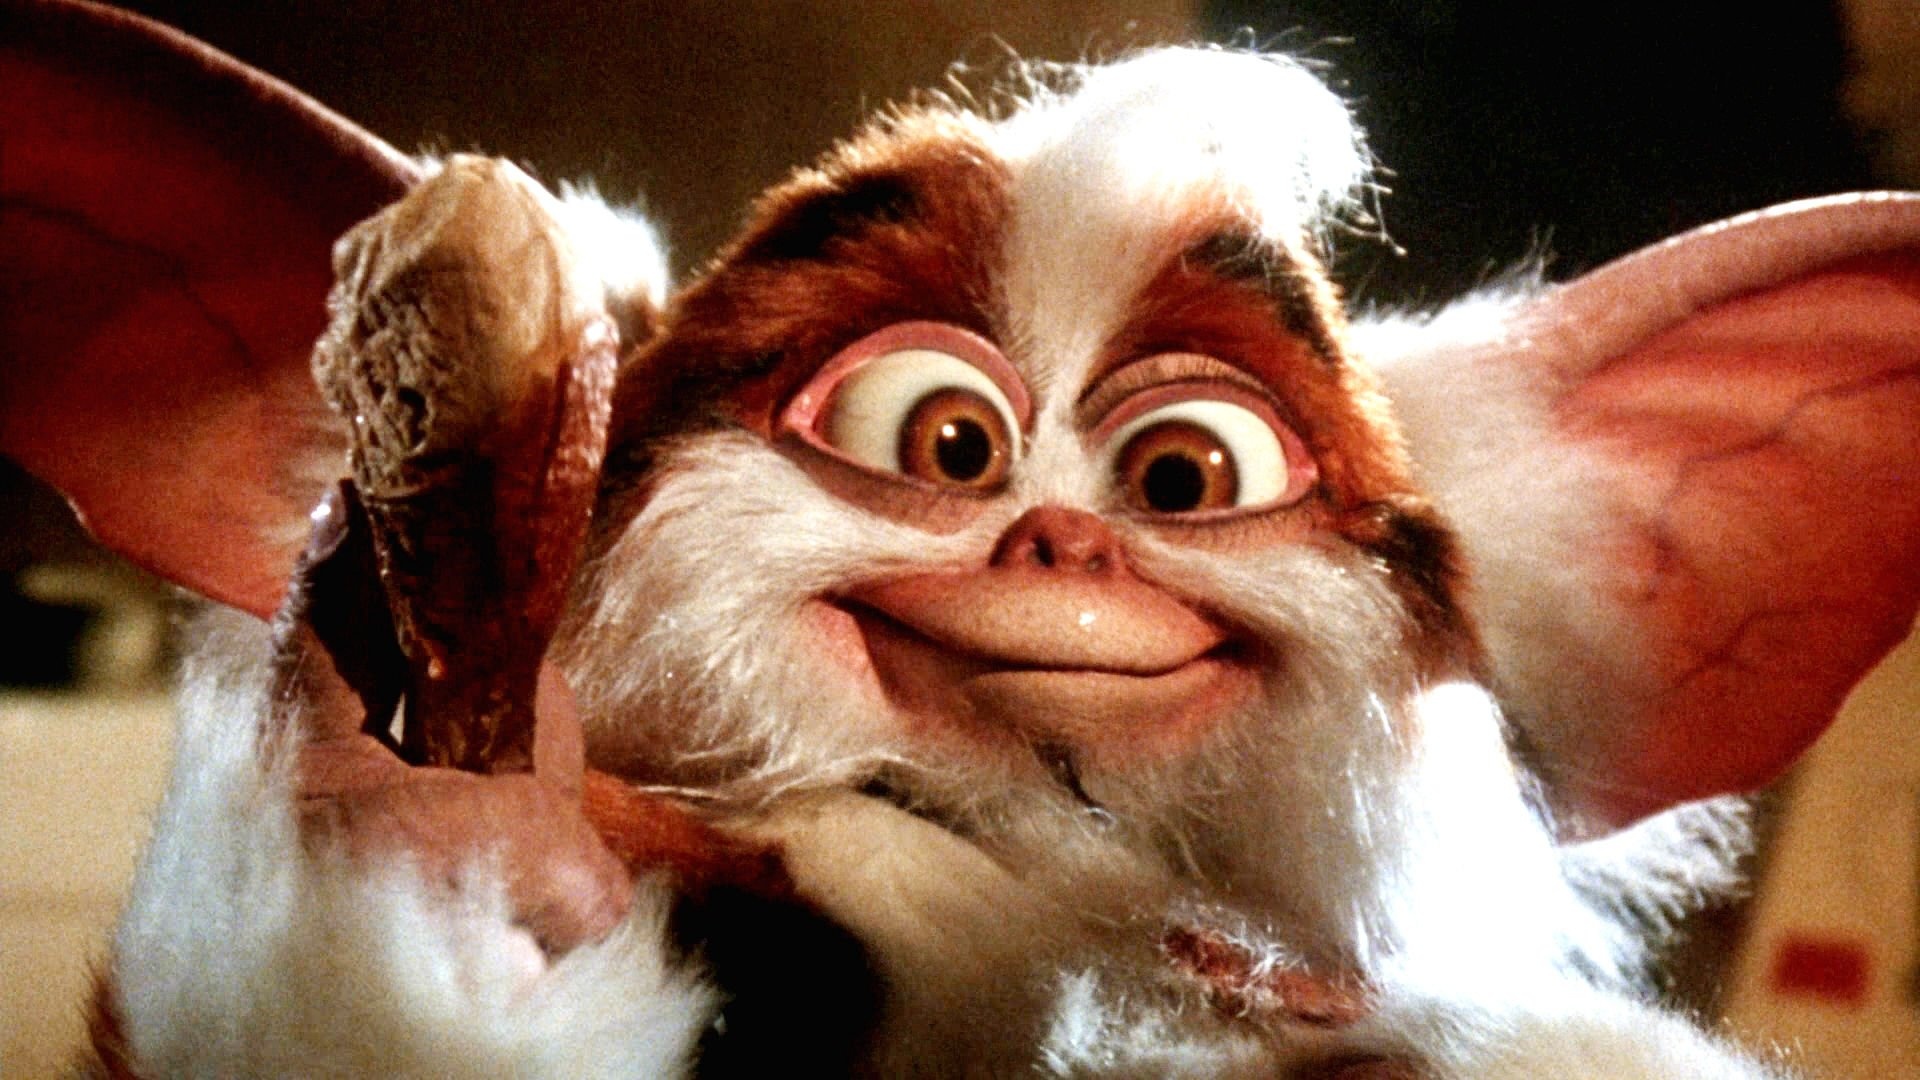 Gremlin: A 1990 black comedy film with creature designs by Rick Baker. 1920x1080 Full HD Wallpaper.